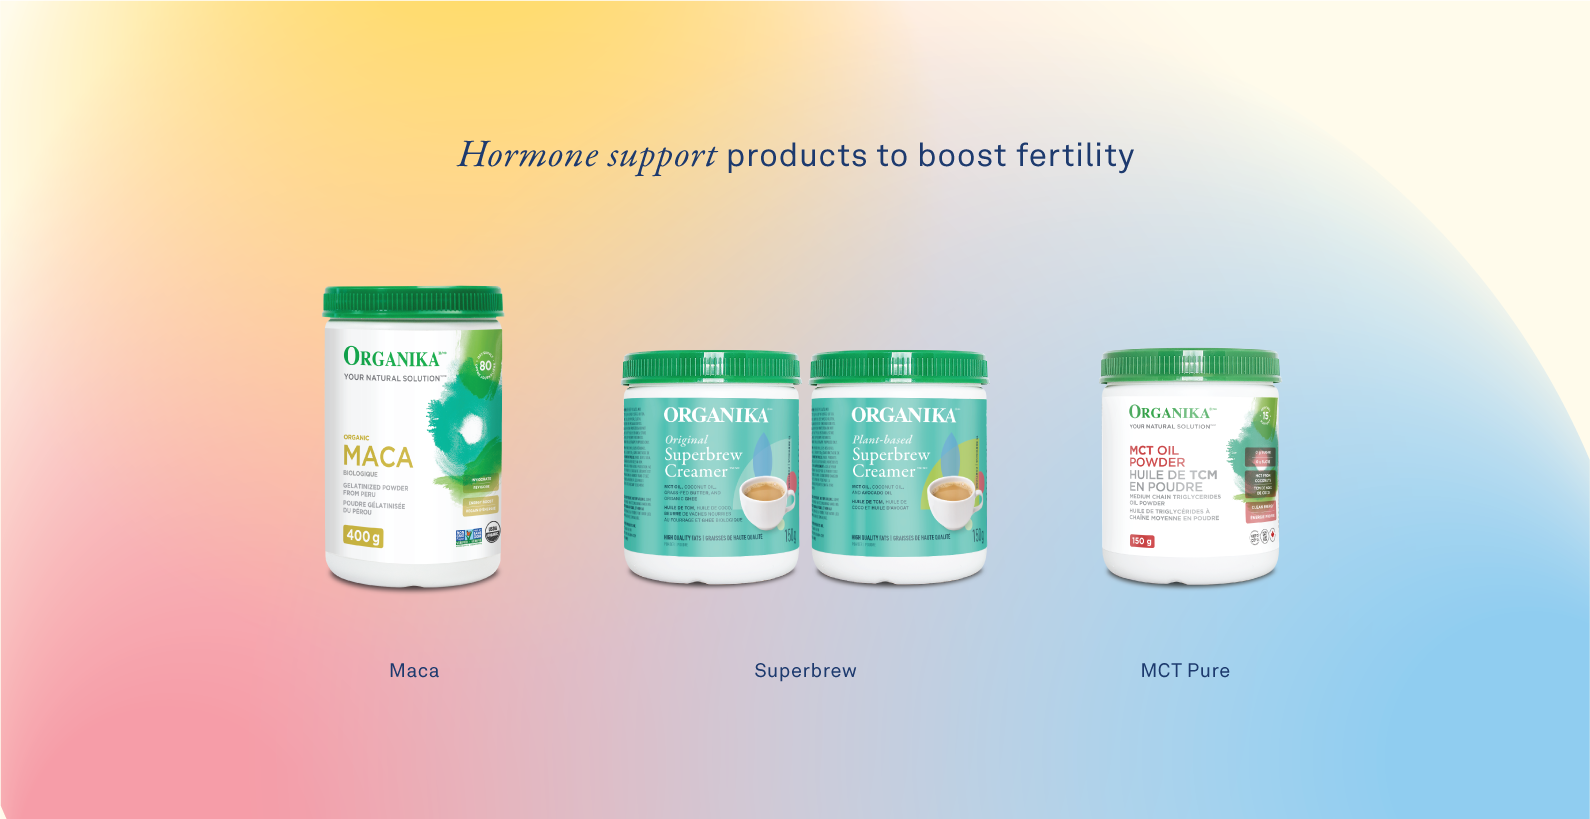 Hormone support products to boost fertility